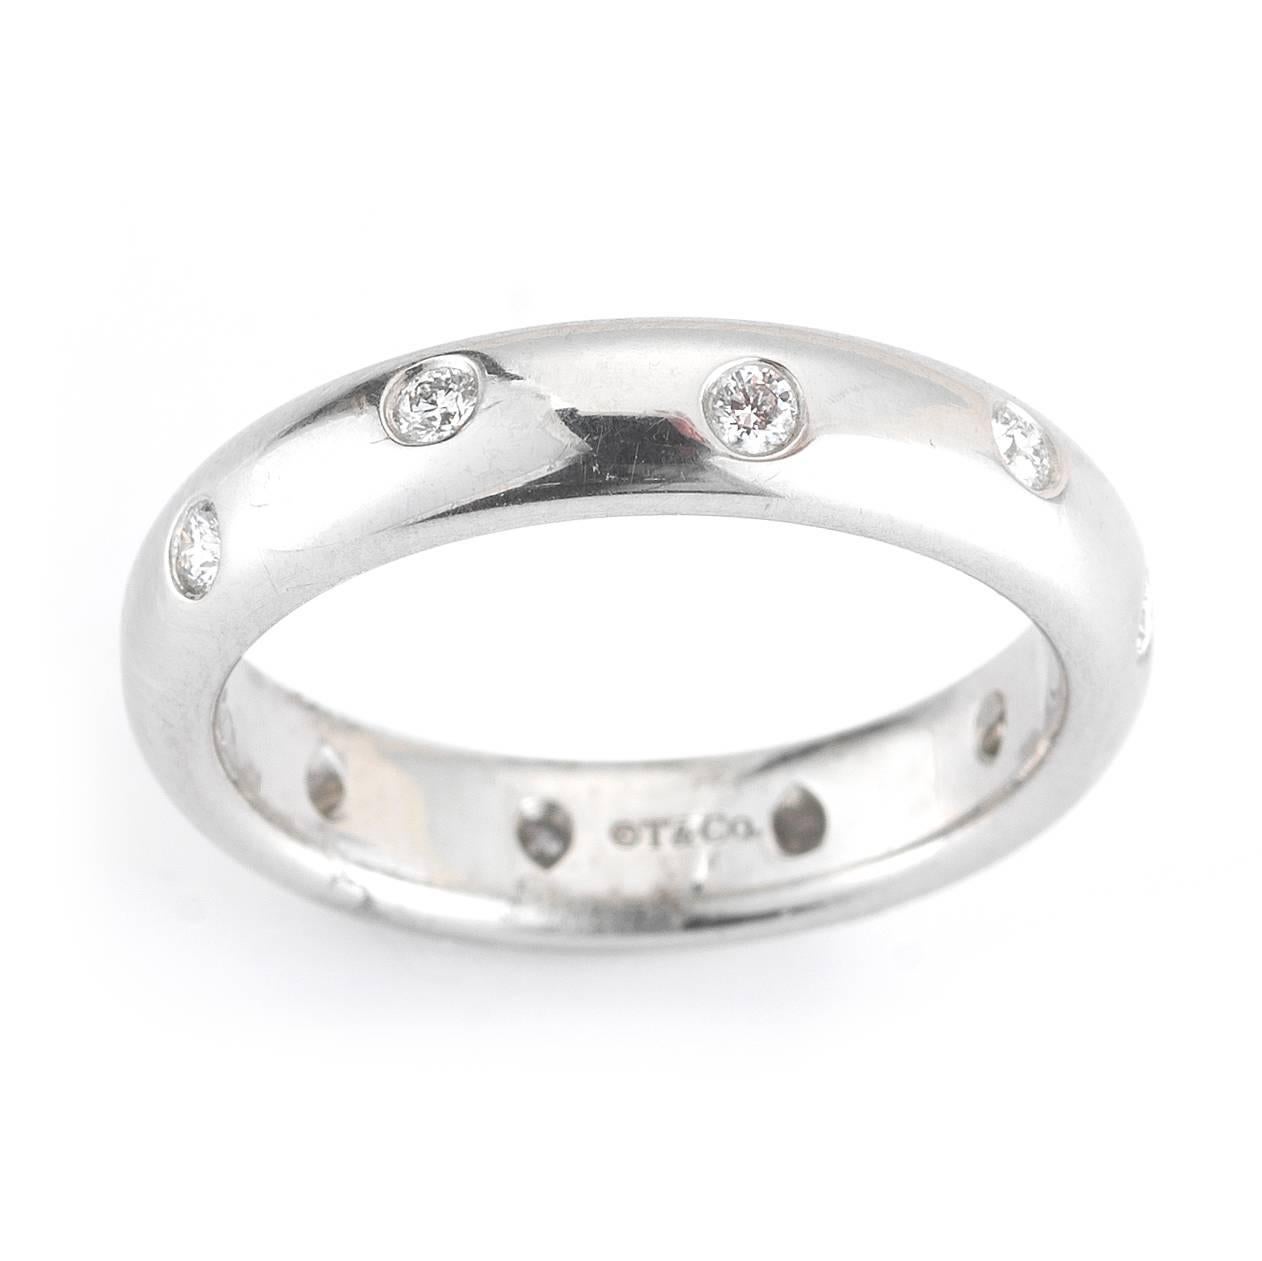 A classically beautiful Tiffany&Co. Etoile Wedding Band. Size 6.25, has 0.22cts of diamonds. Set in Platinum.